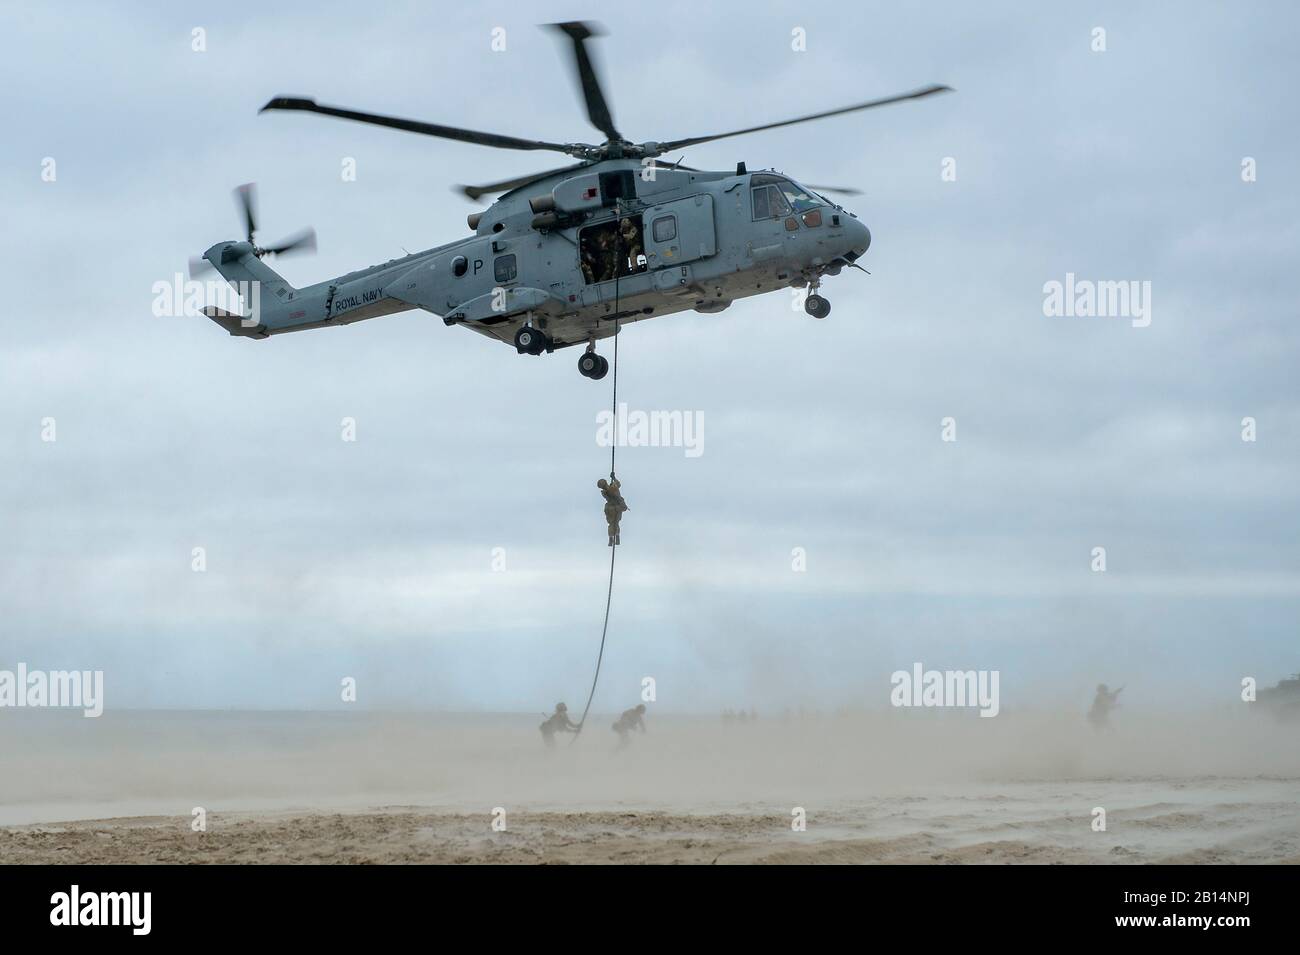 British Royal Marines fast rope from a British Merlin helicopter during a distinguished visitor (DV) day amphibious landing exhibition held as part of Exercise Baltic Operations (BALTOPS) 2019 at Palanga, Lithuania, June 16, 2019 . BALTOPS is the premier annual maritime-focused exercise in the Baltic Region, marking the 47th year of one of the largest exercises in Northern Europe enhancing flexibility and interoperability among allied and partner nations. (U.S. Navy photo by Mass Communication Specialist 2nd Class Joshua M. Tolbert) Stock Photo